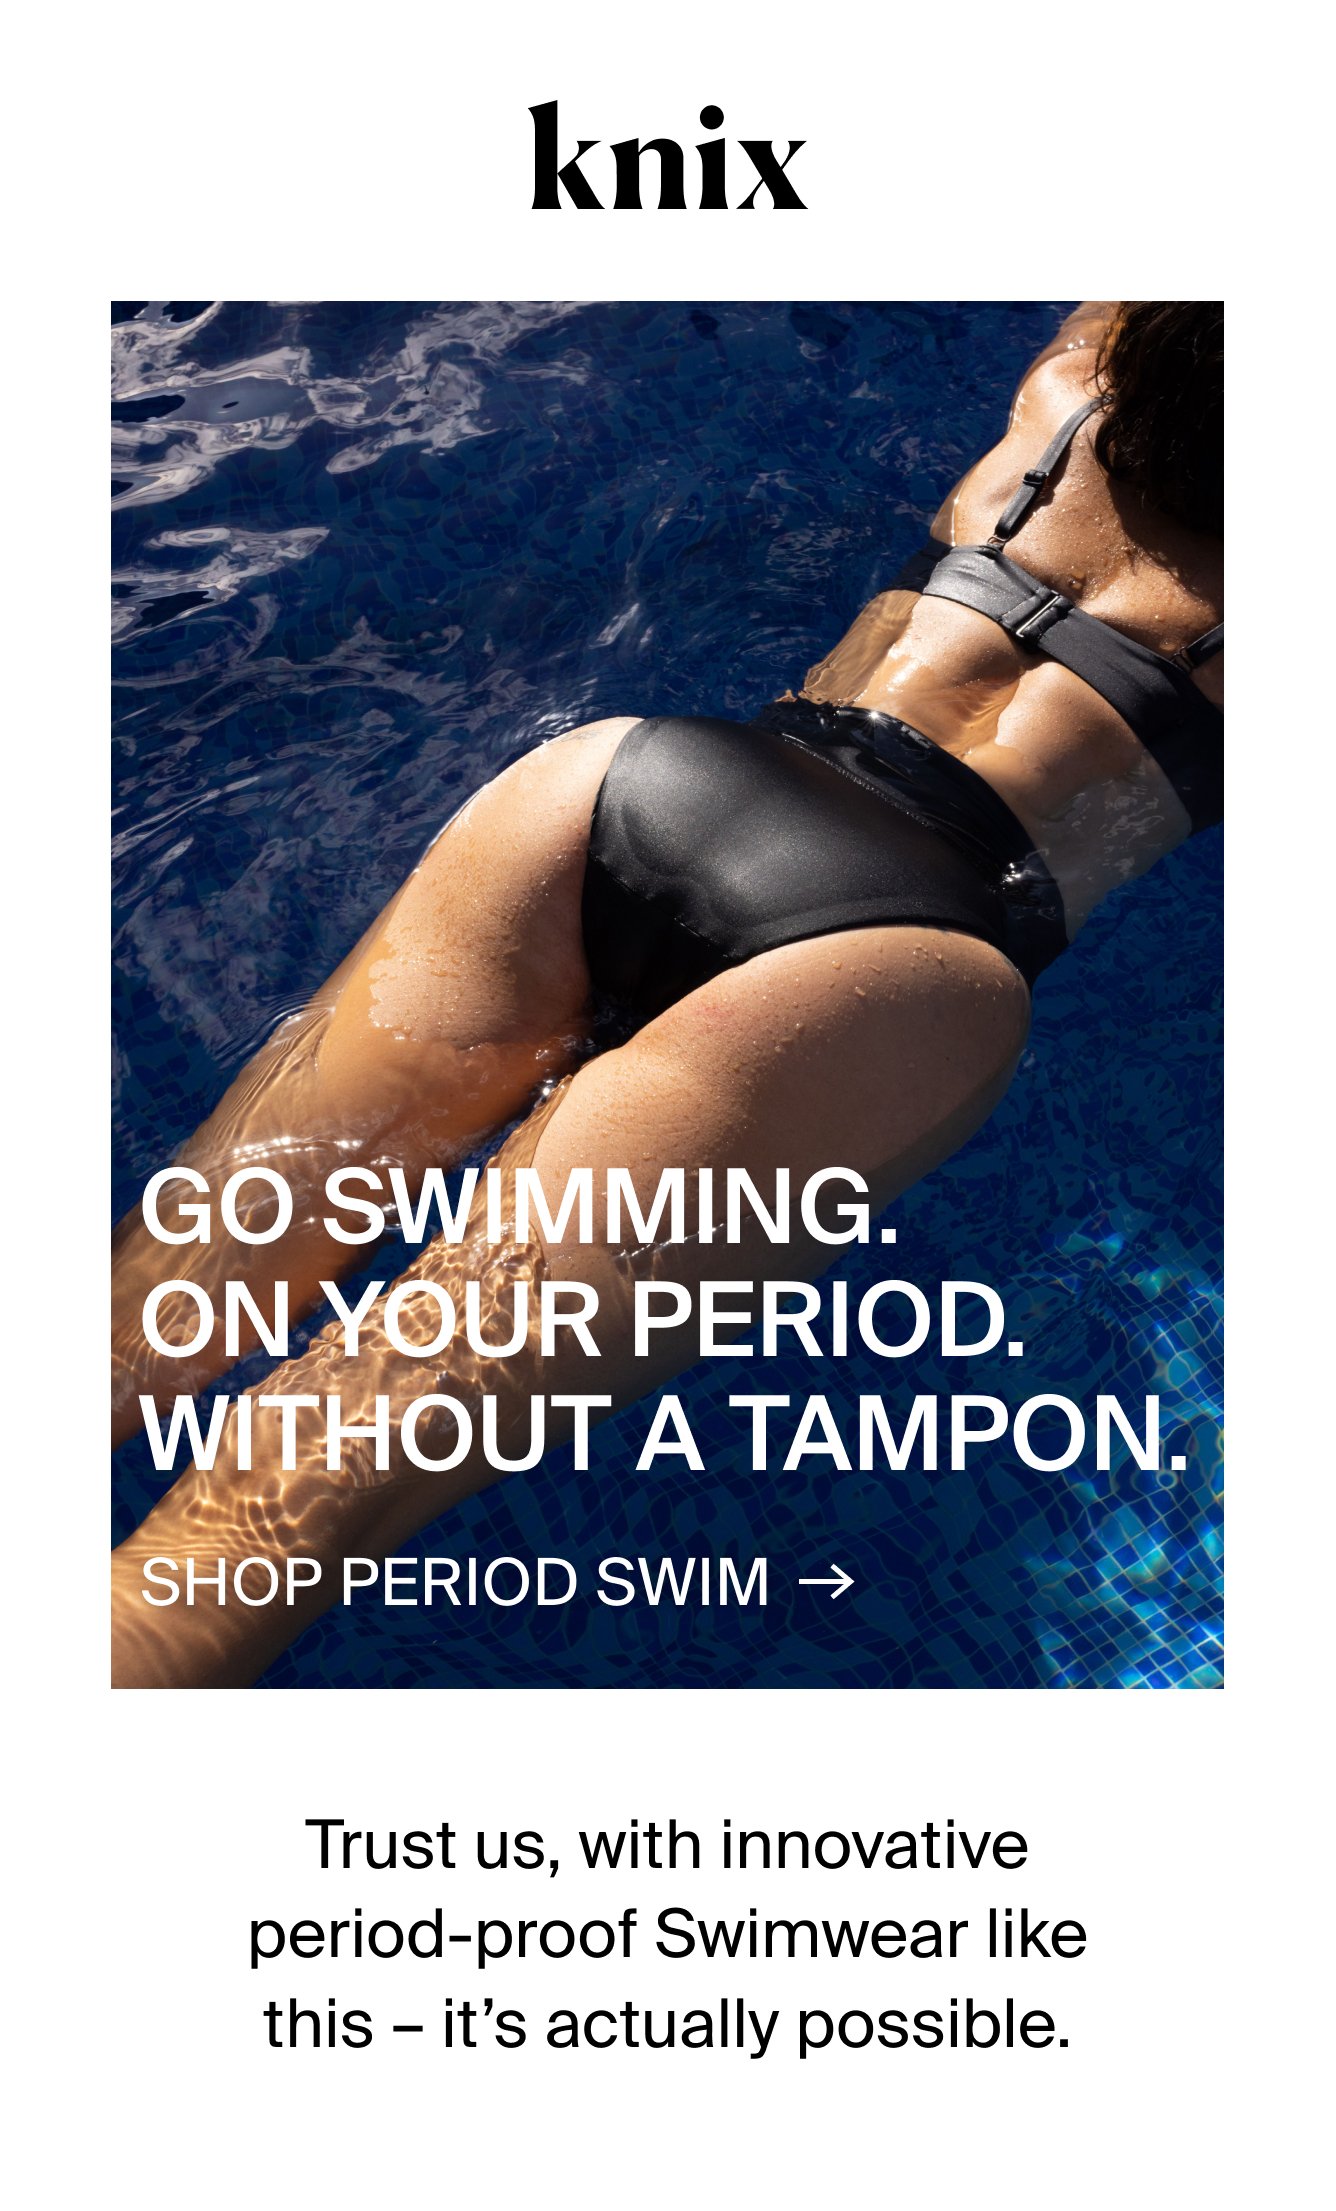 Can You Swim On Your Period?